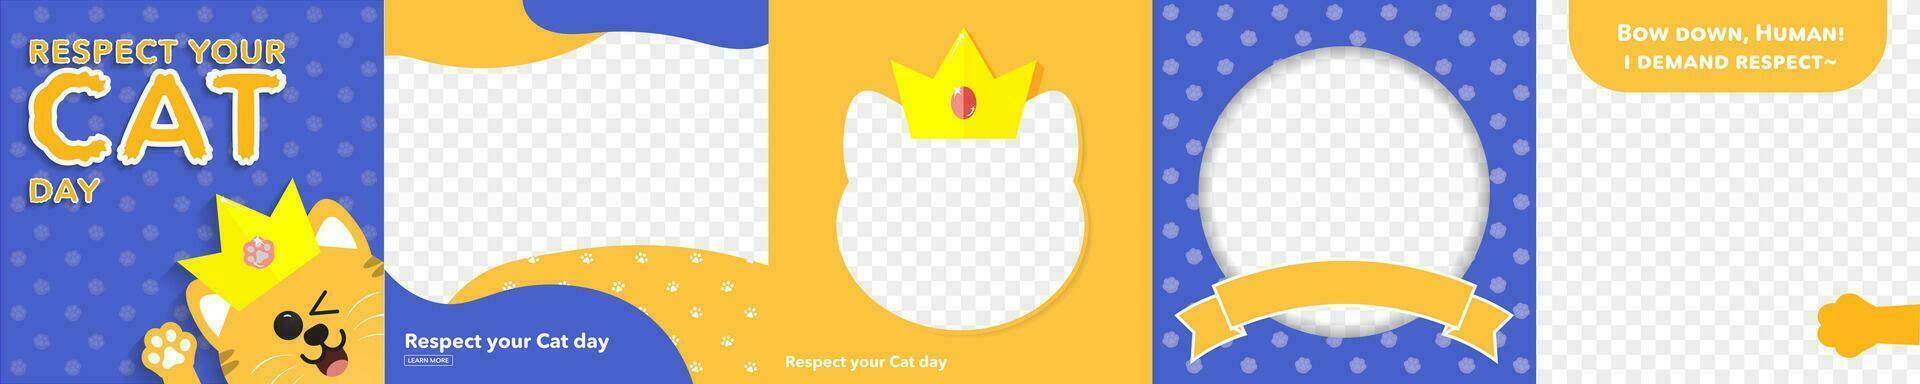 Respect your cat day greeting card and frame set. Cat-shaped frames with crown. Editable Vector Illustration. EPS 10.